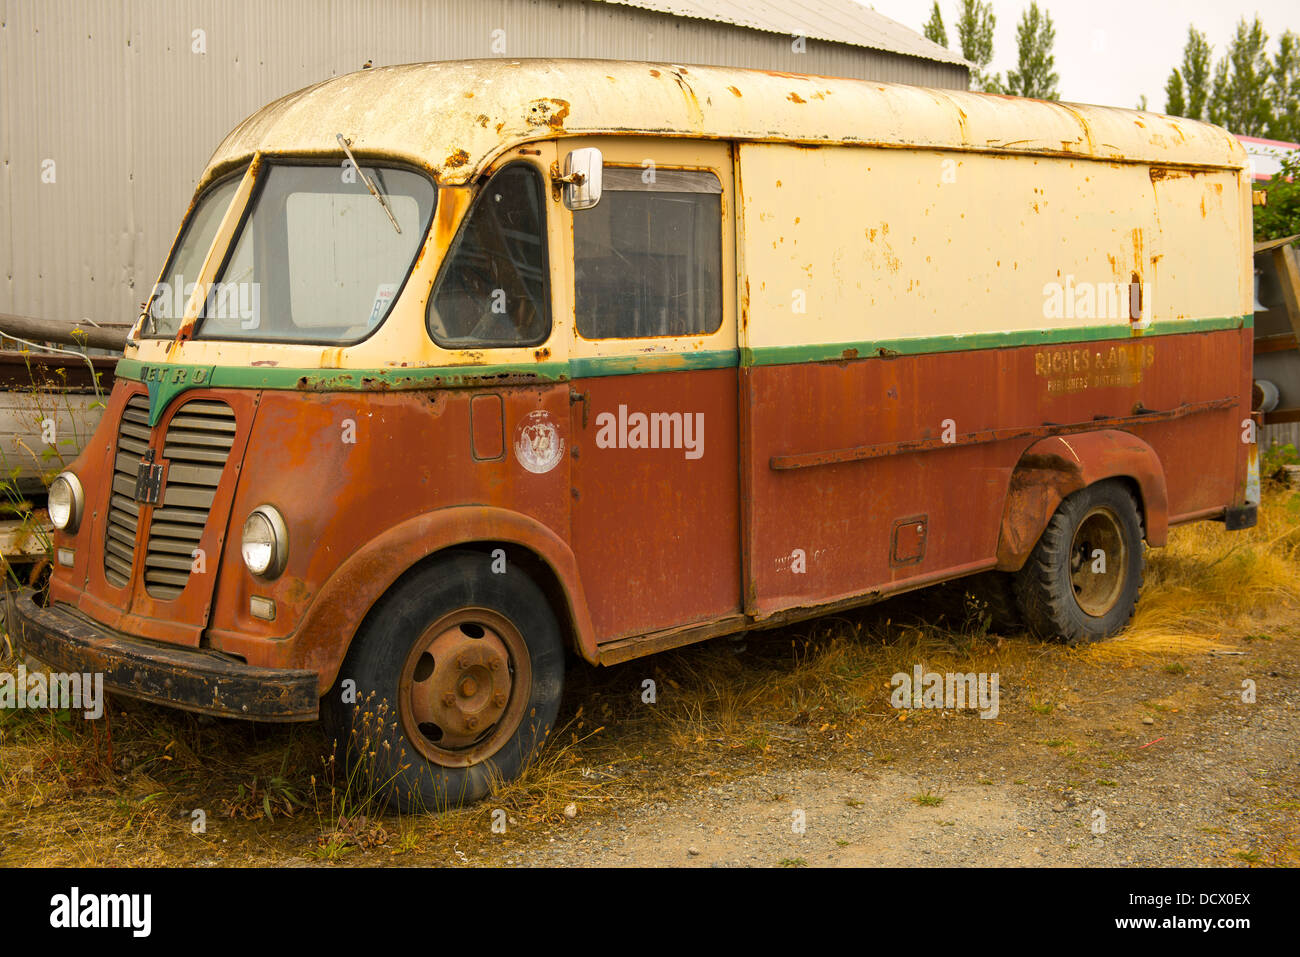 Old and rusting delivery truck from early 1960's...the International Harvester Metro van originally designed for milk delivery. Stock Photo